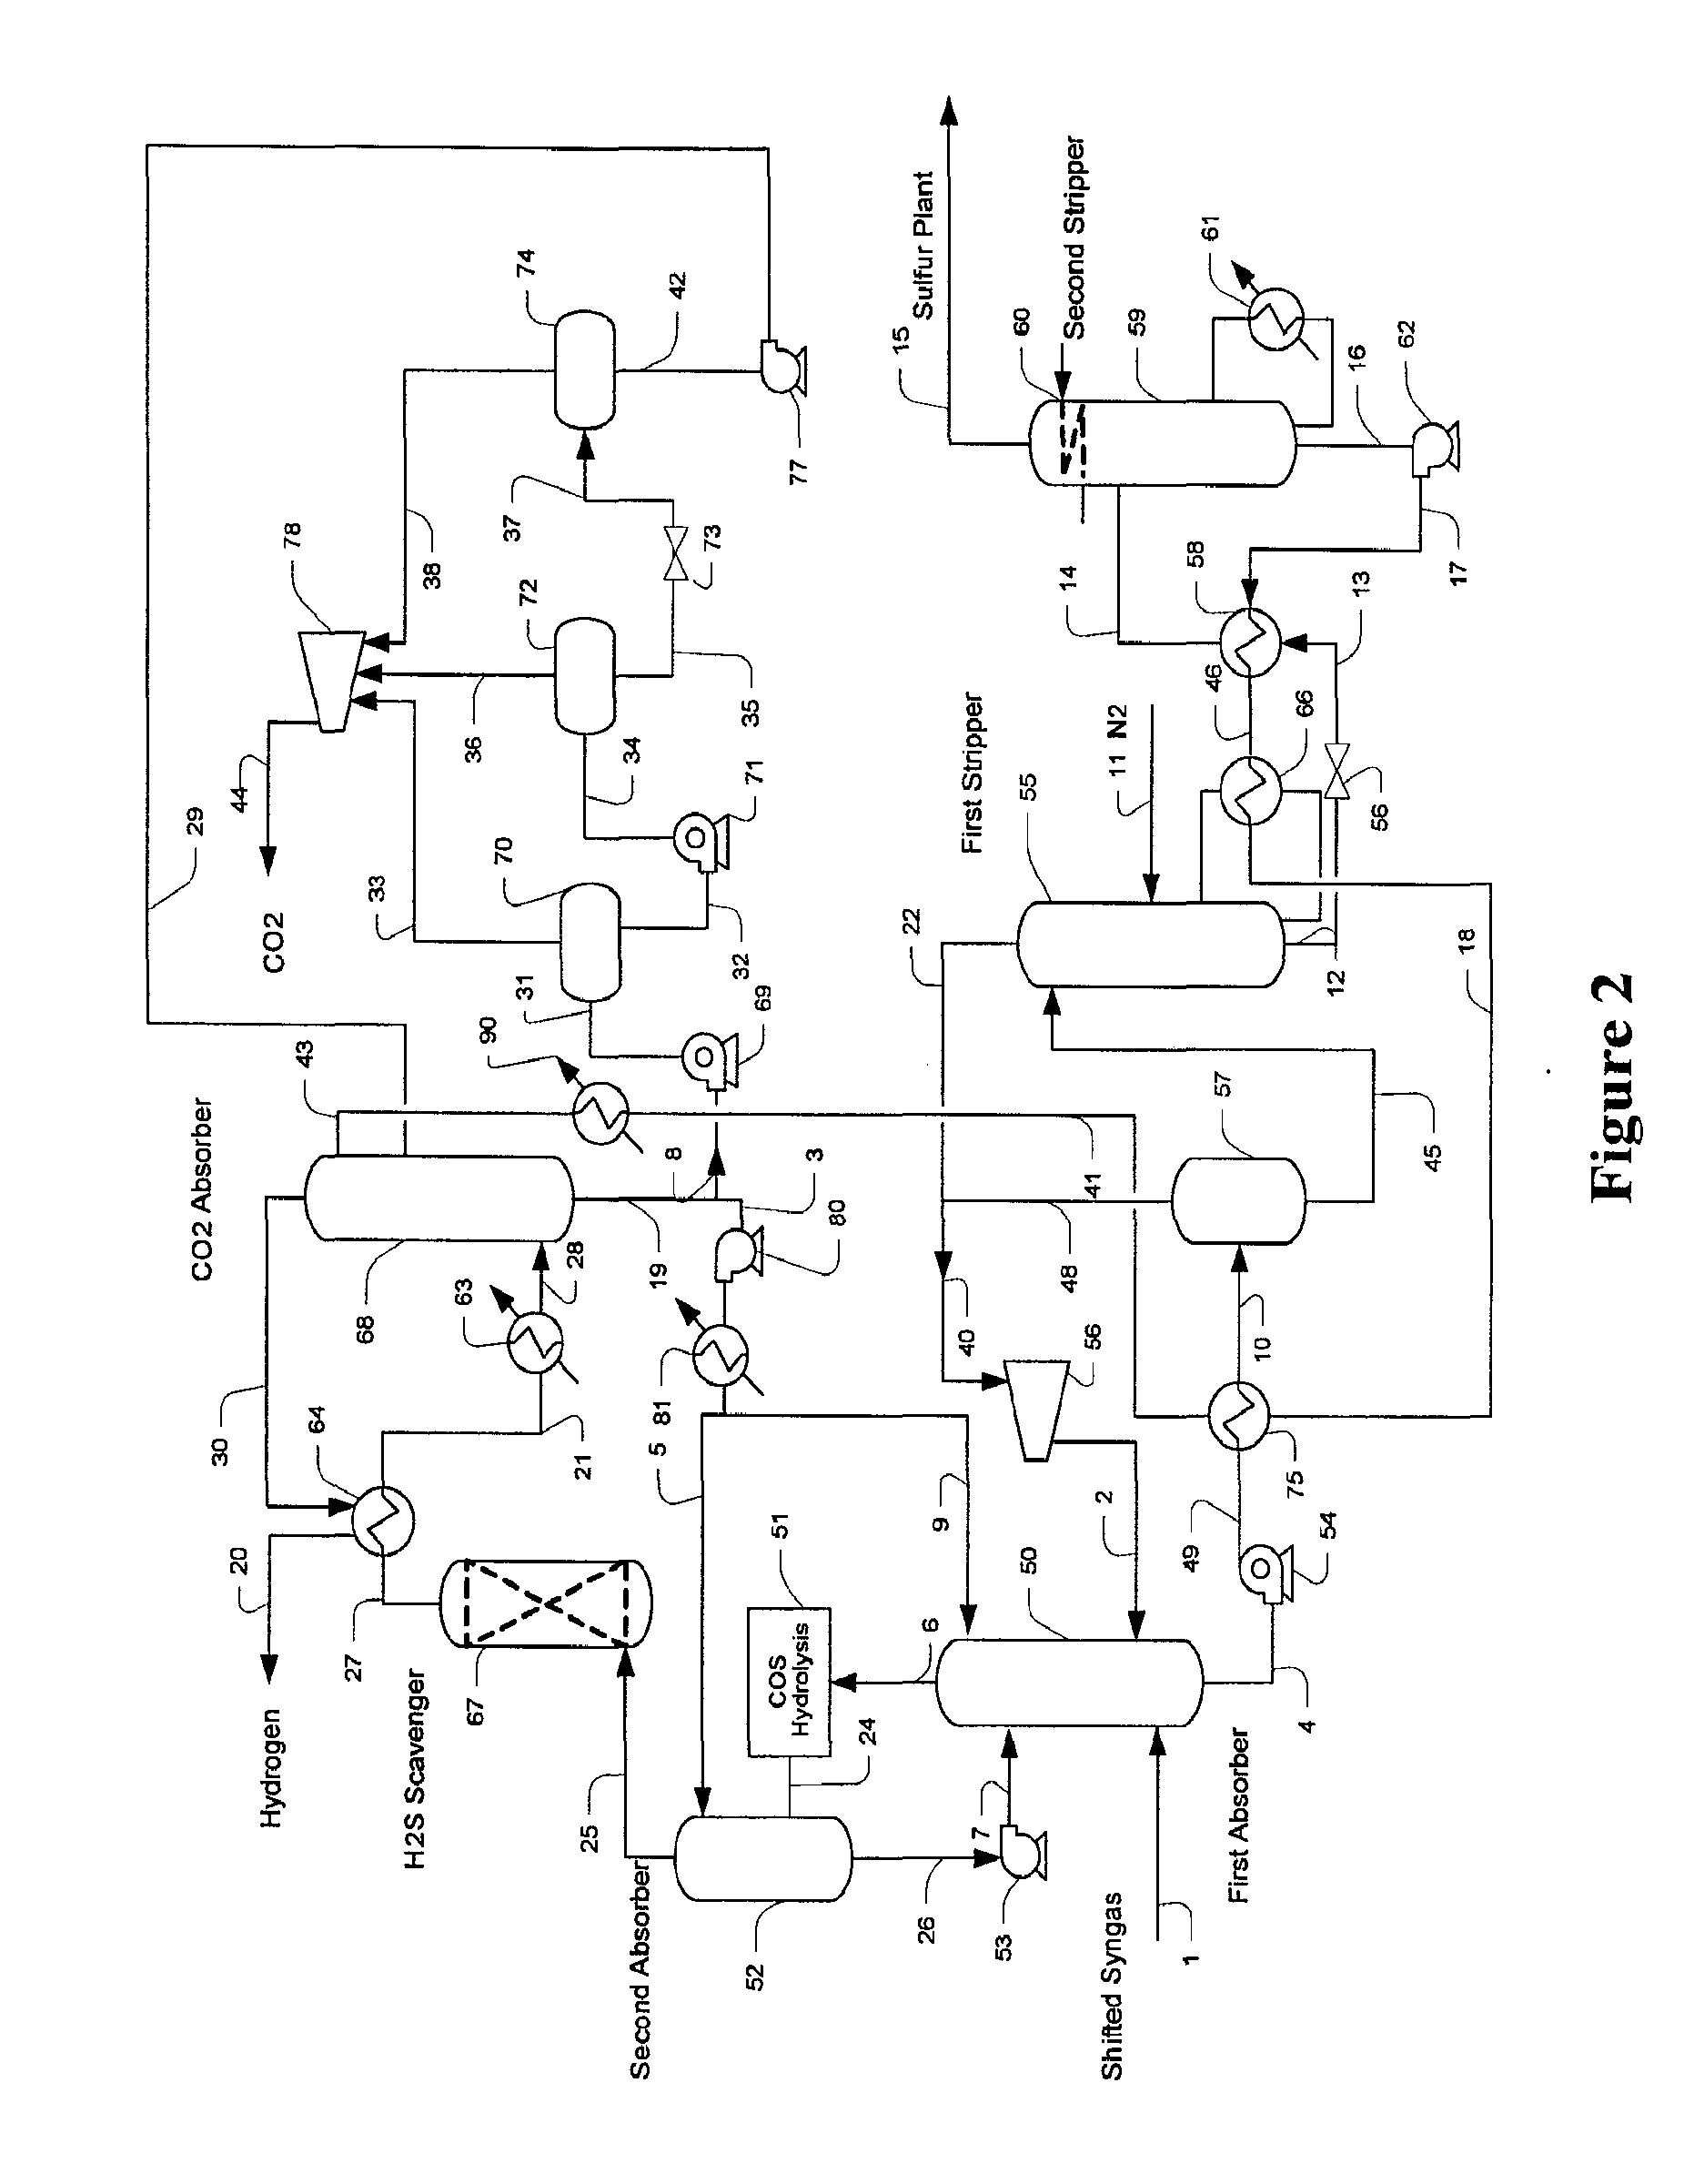 Configurations And Methods For Carbon Dioxide And Hydrogen Production From Gasification Streams